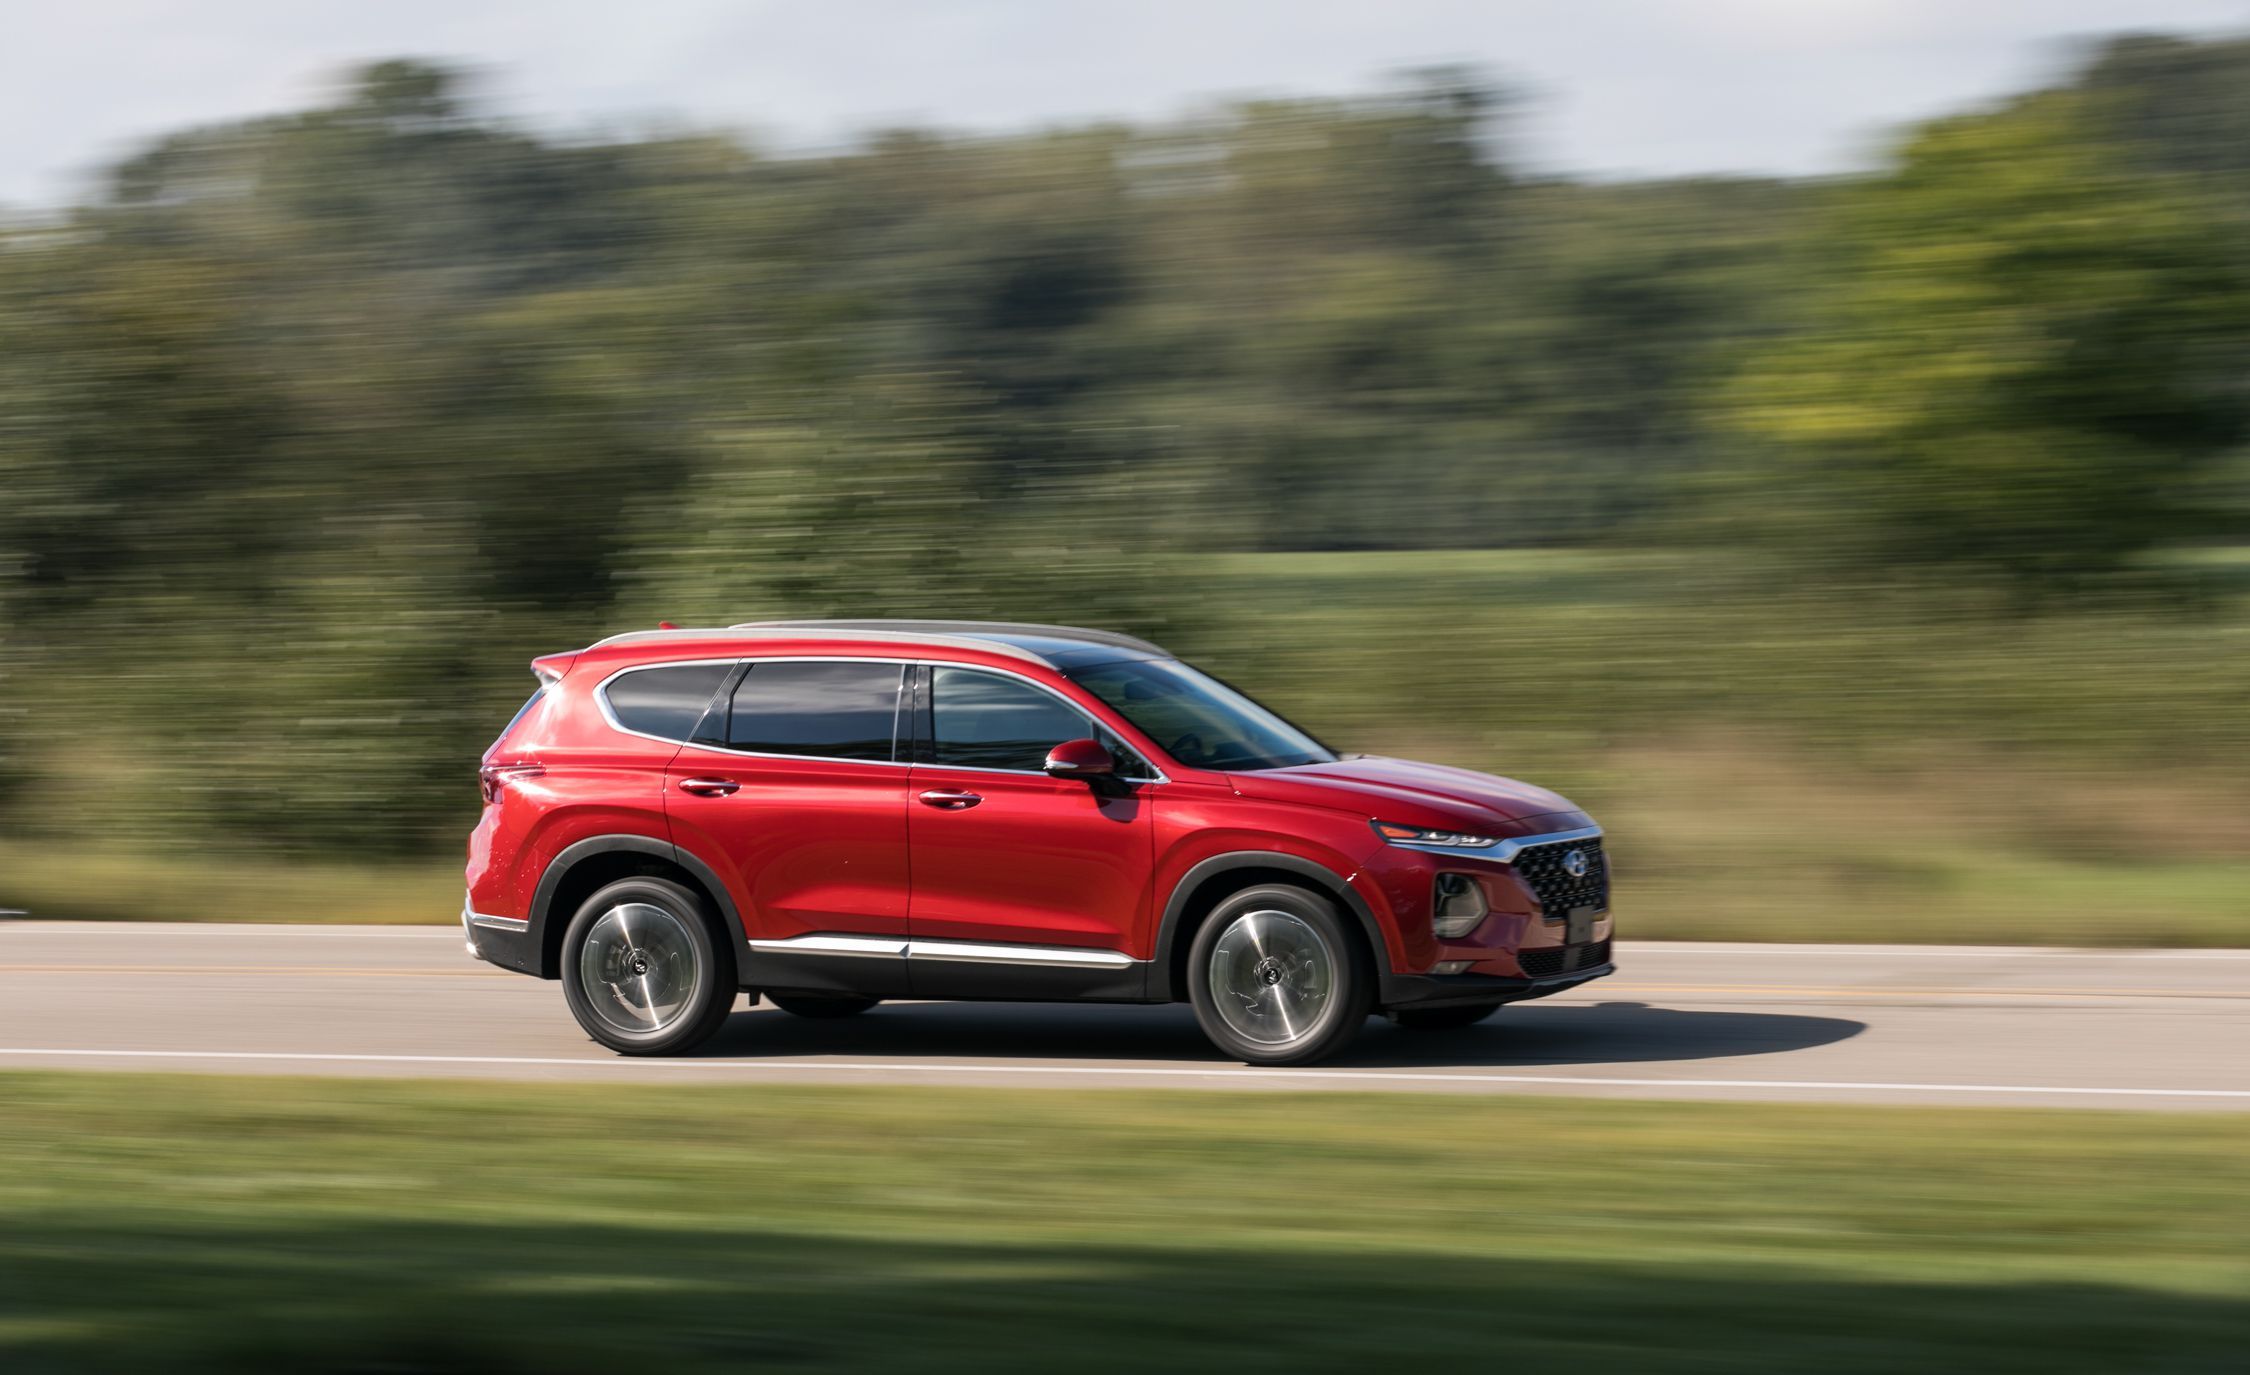 The 2019 Hyundai Santa Fe Delivers on Its Promises